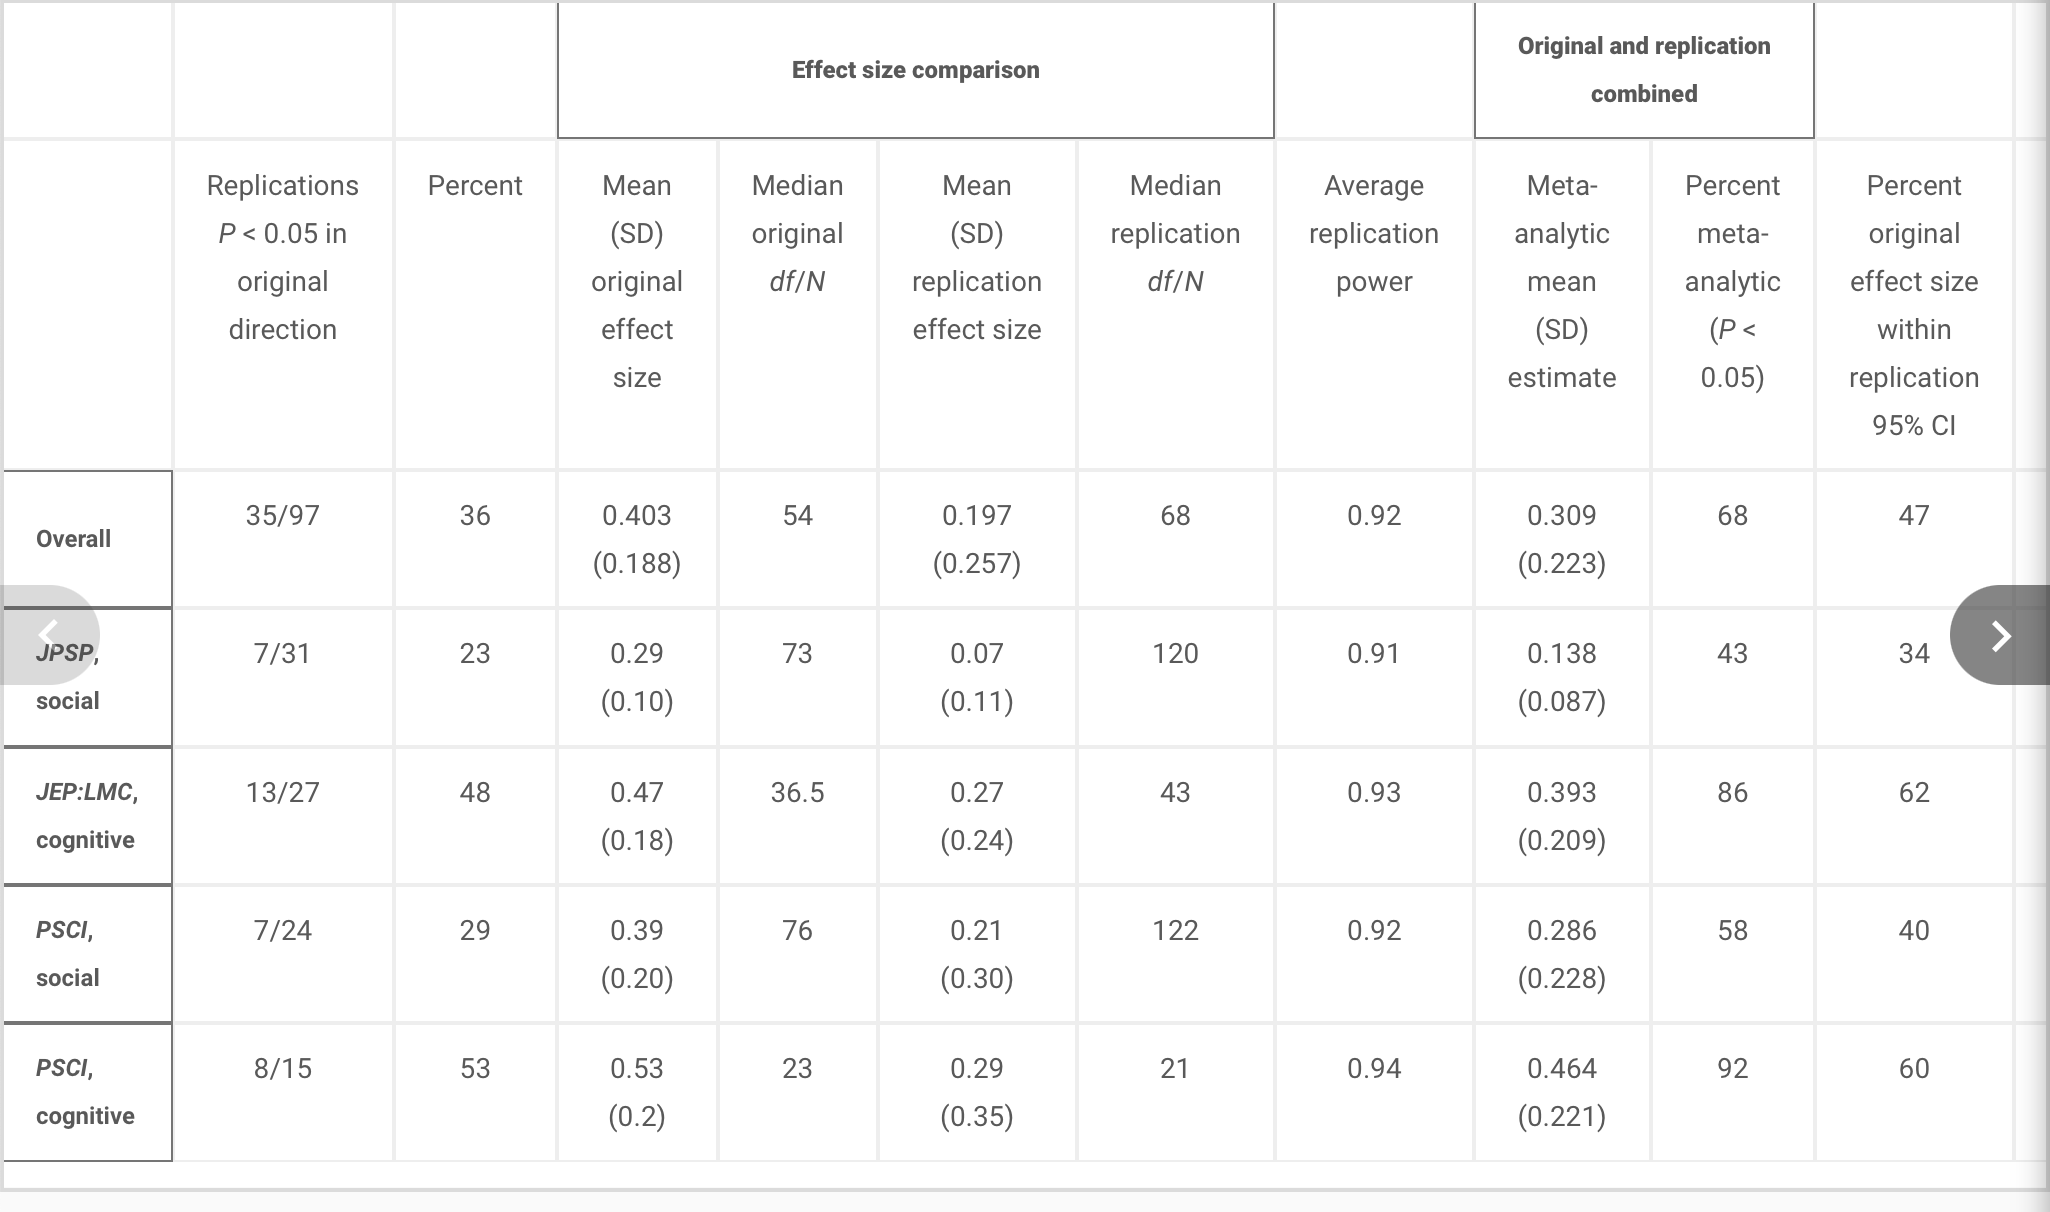 Table 1 from [@collaboration_estimating_2015](https://doi.org/10.1126/science.aac4716). Summary of reproducibility rates and effect sizes for original and replication studies overall and by journal/discipline.